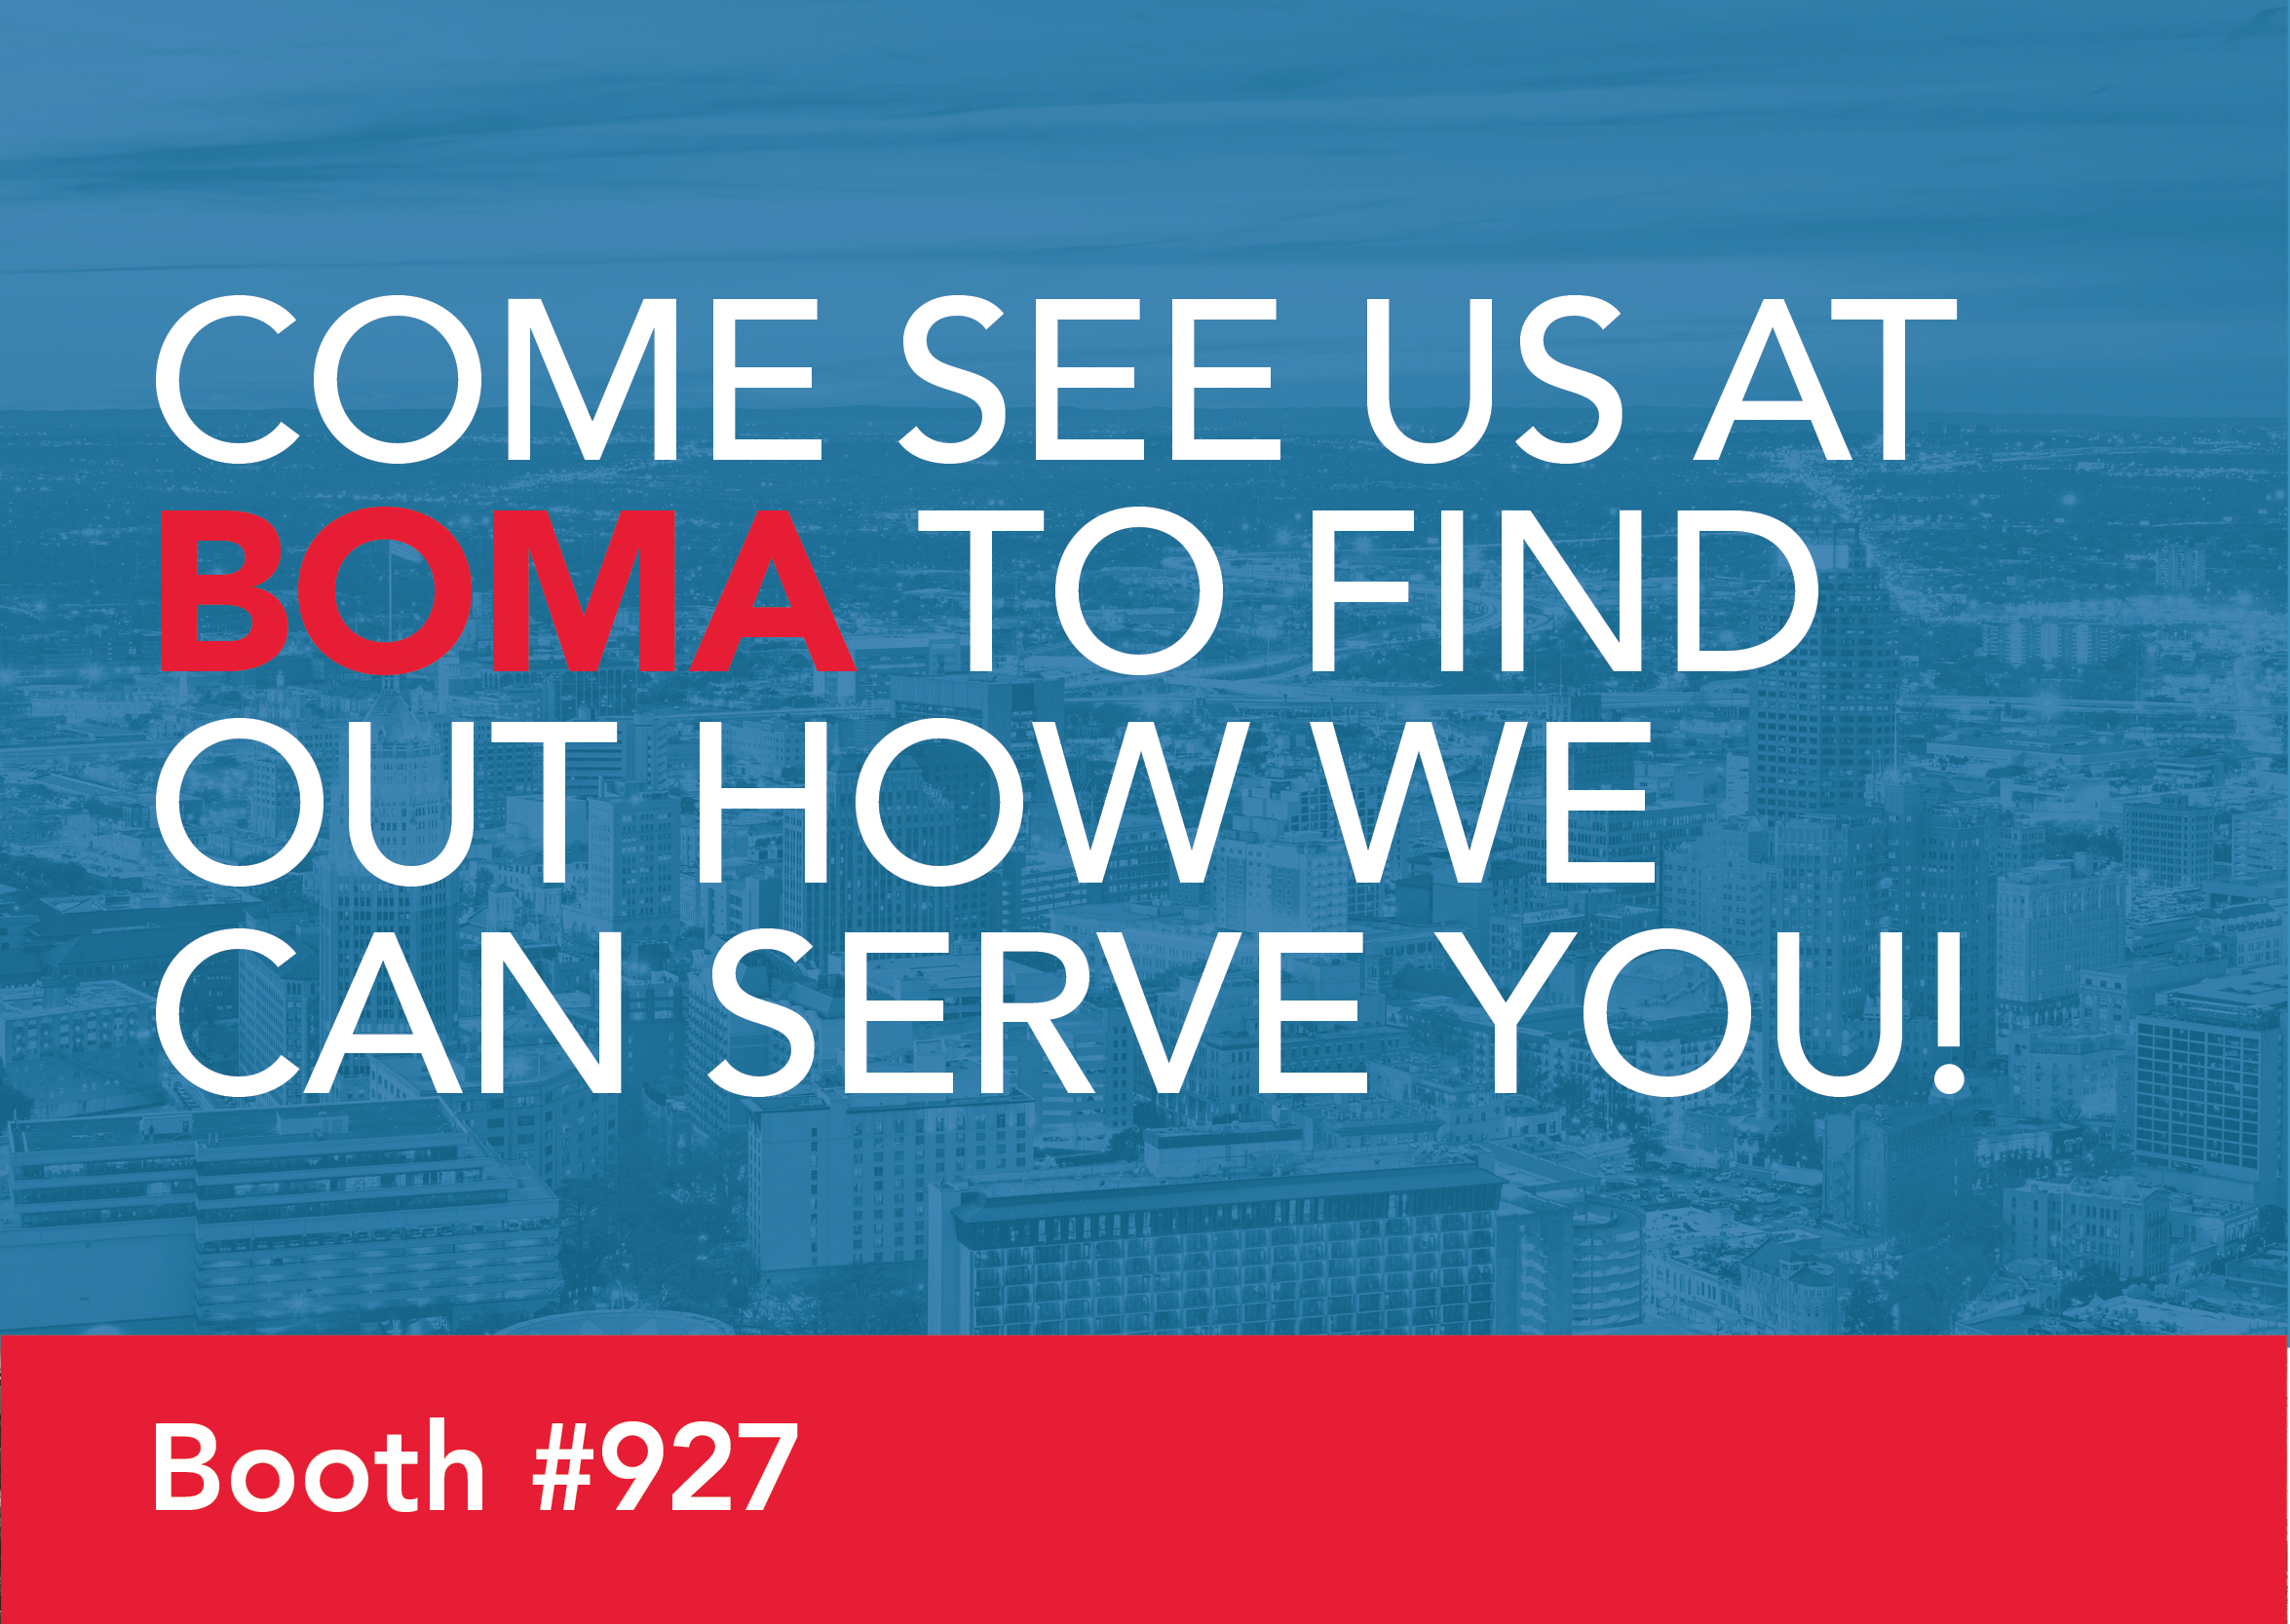 Come see us at BOMA to find out how we can serve you | Booth #927